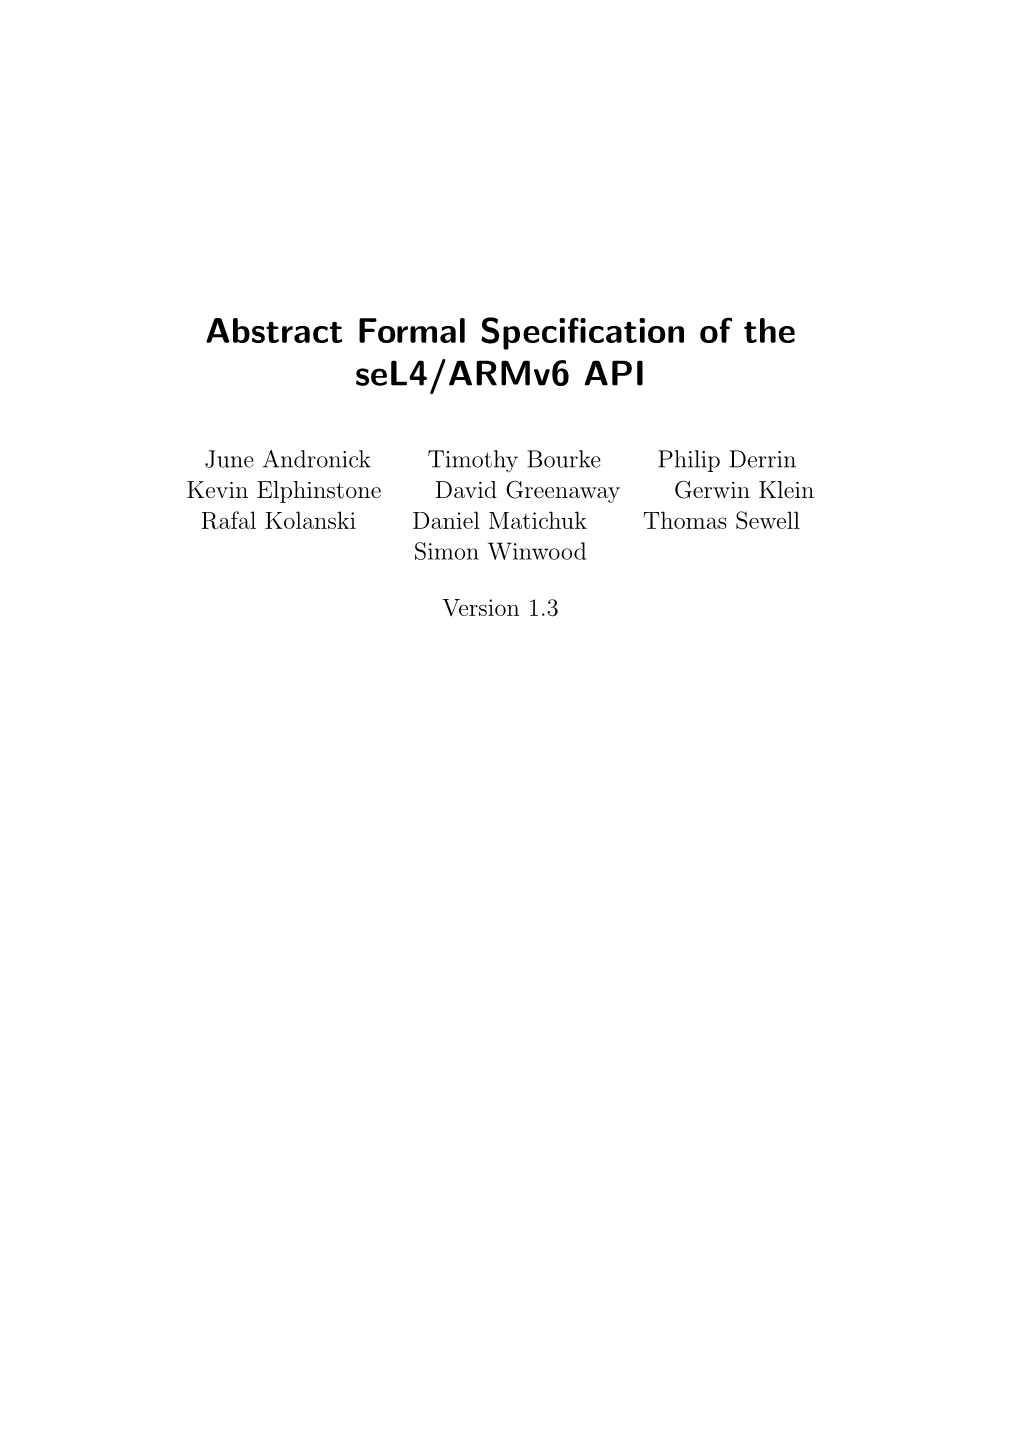 Abstract Formal Specification of the Sel4/Armv6